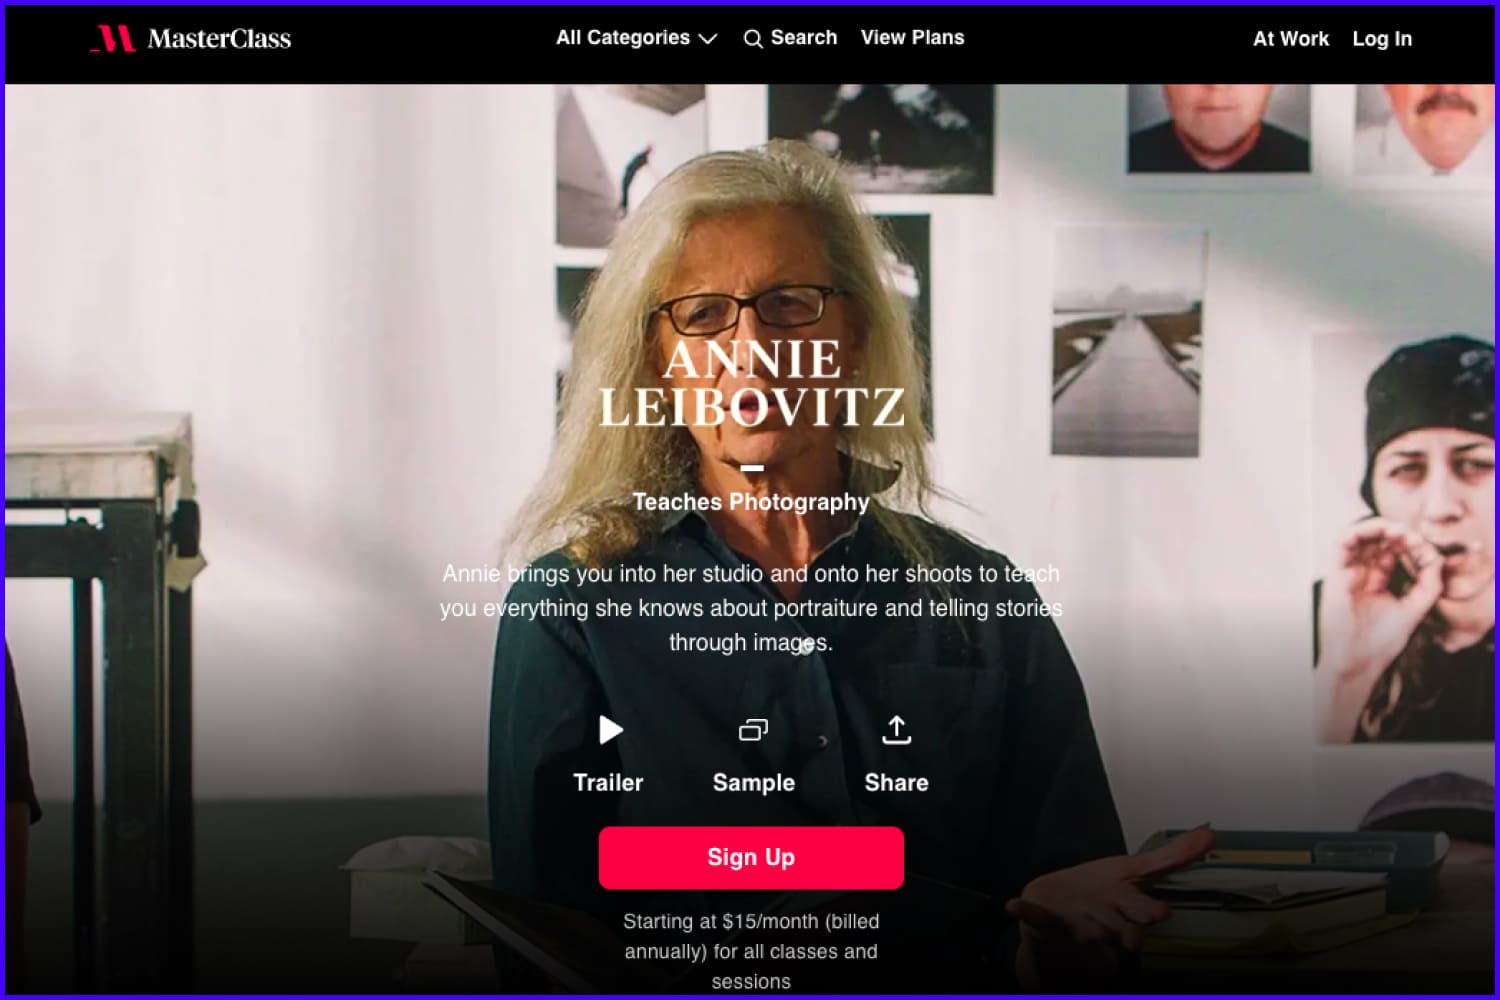 Screenshot of the main page of the Annie Leibovitz Master Class website.